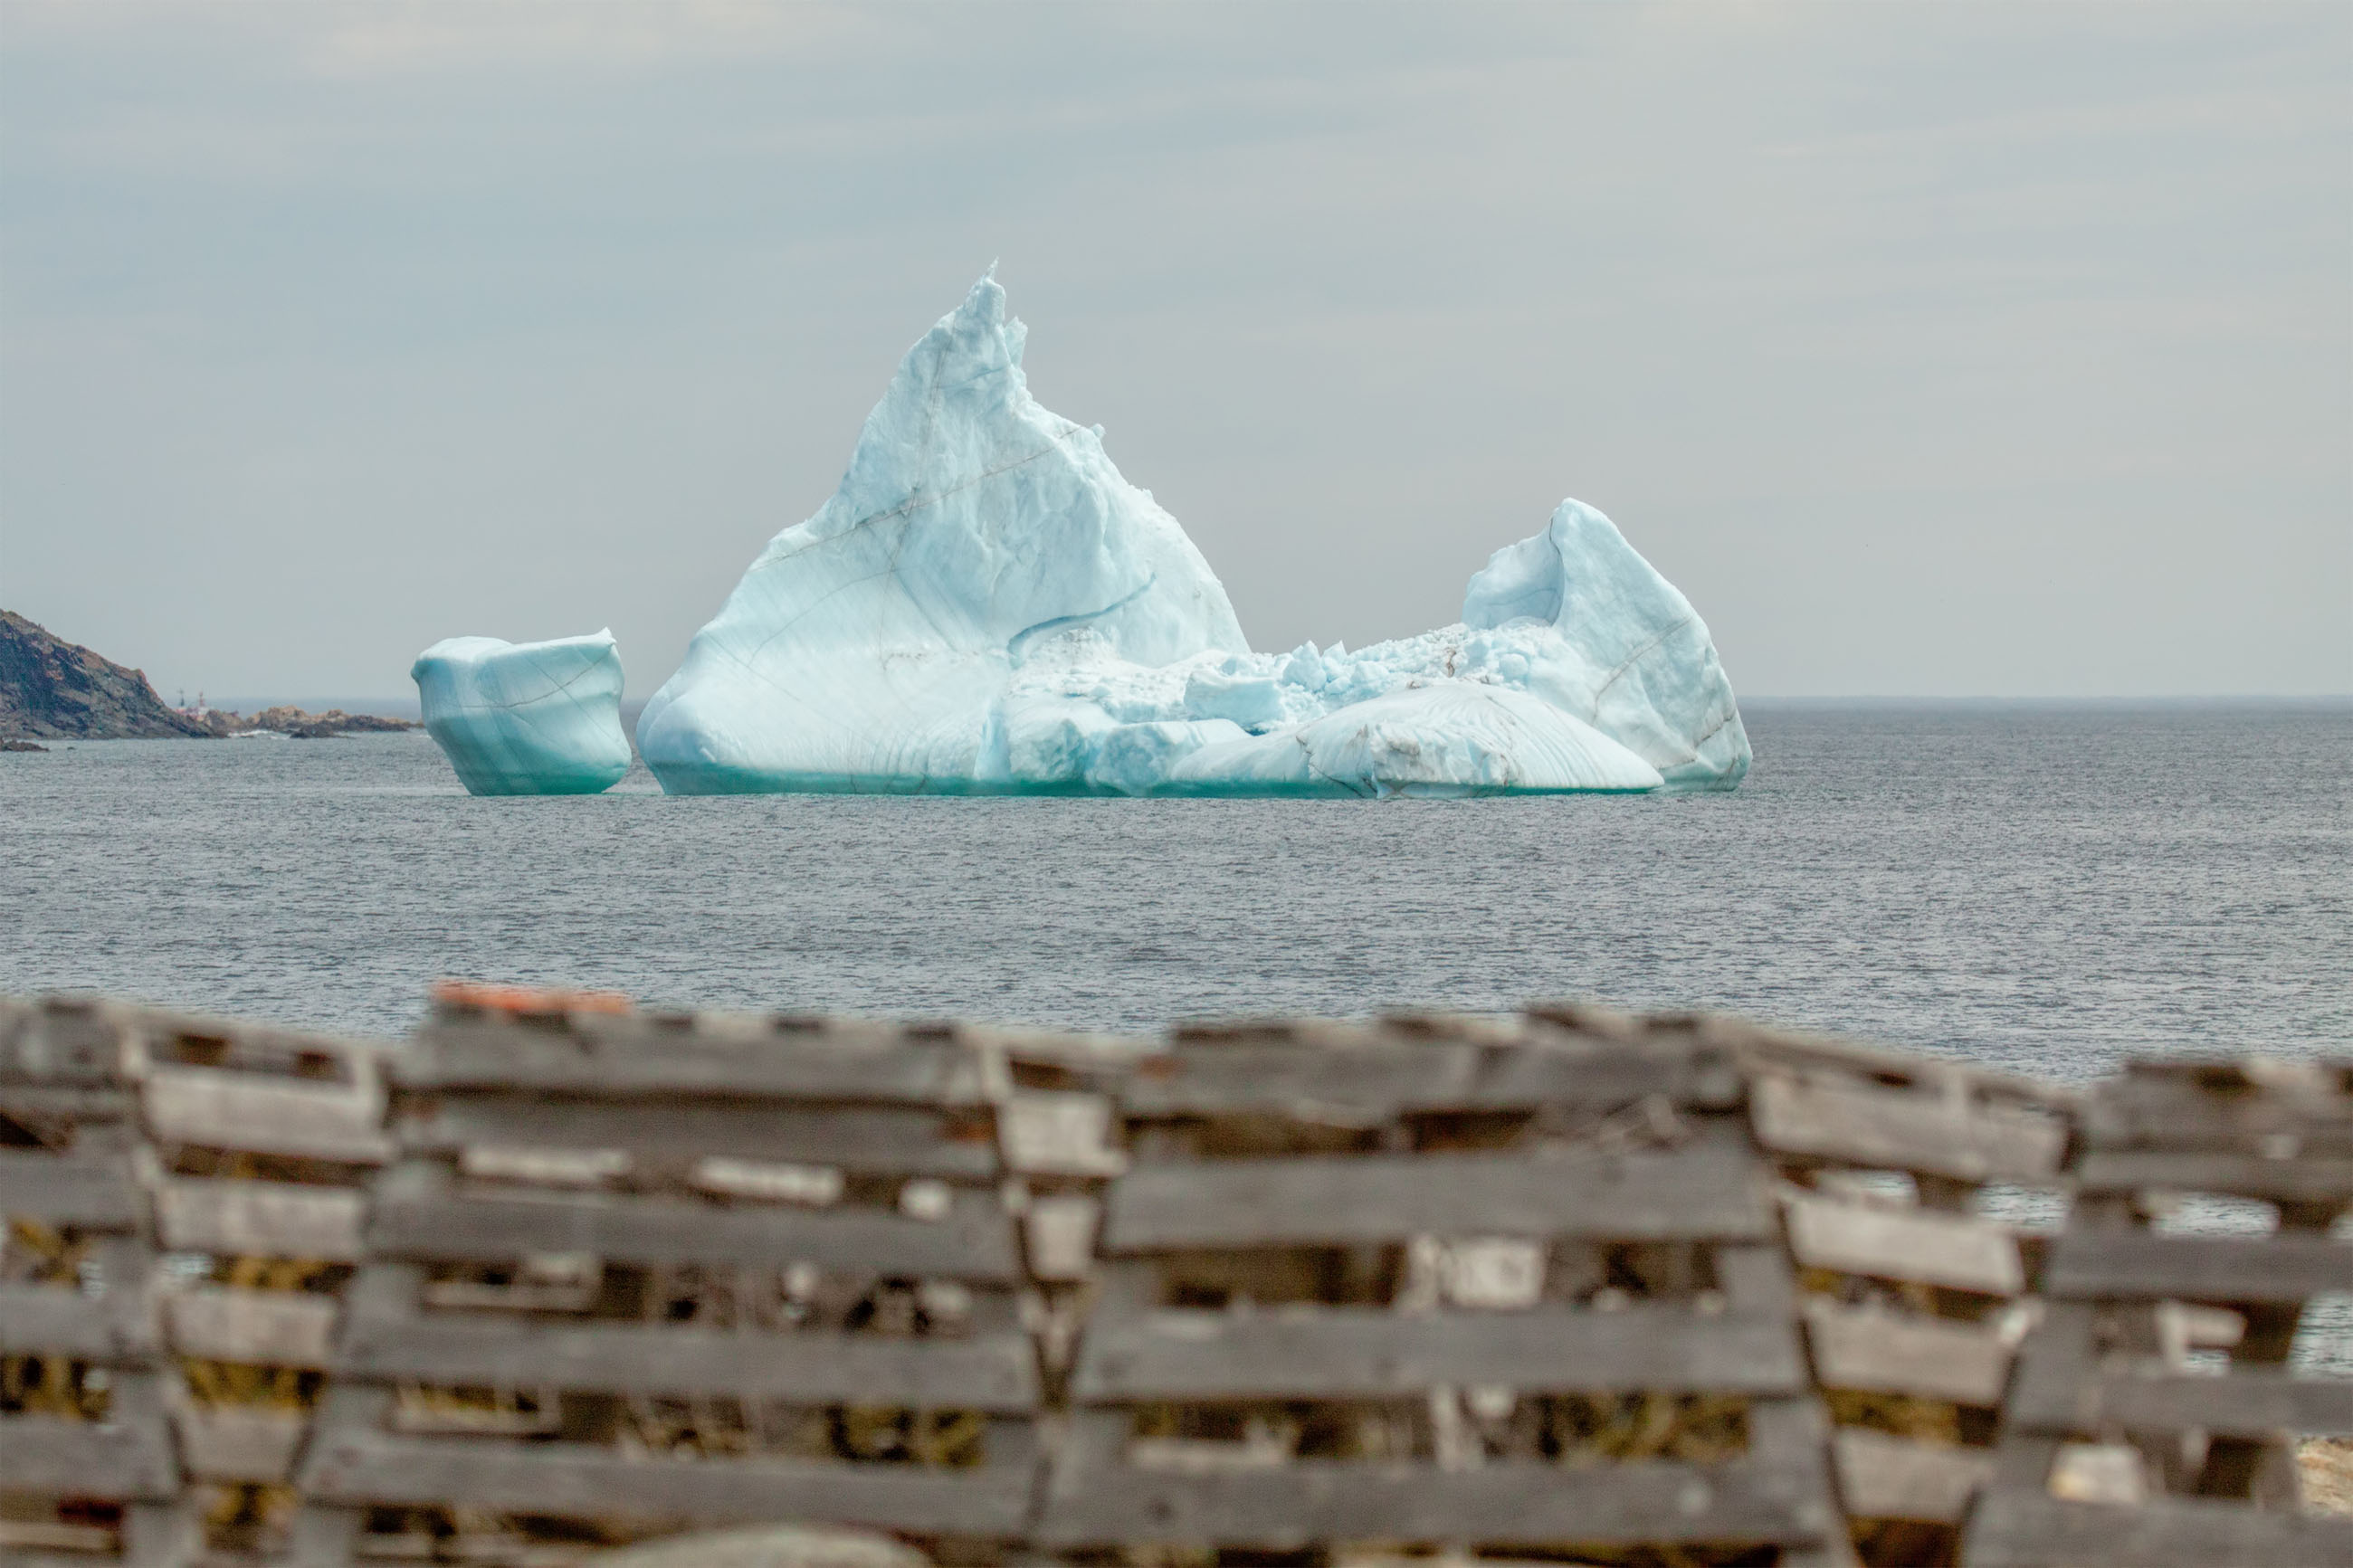 Lobster pots and iceberg photo